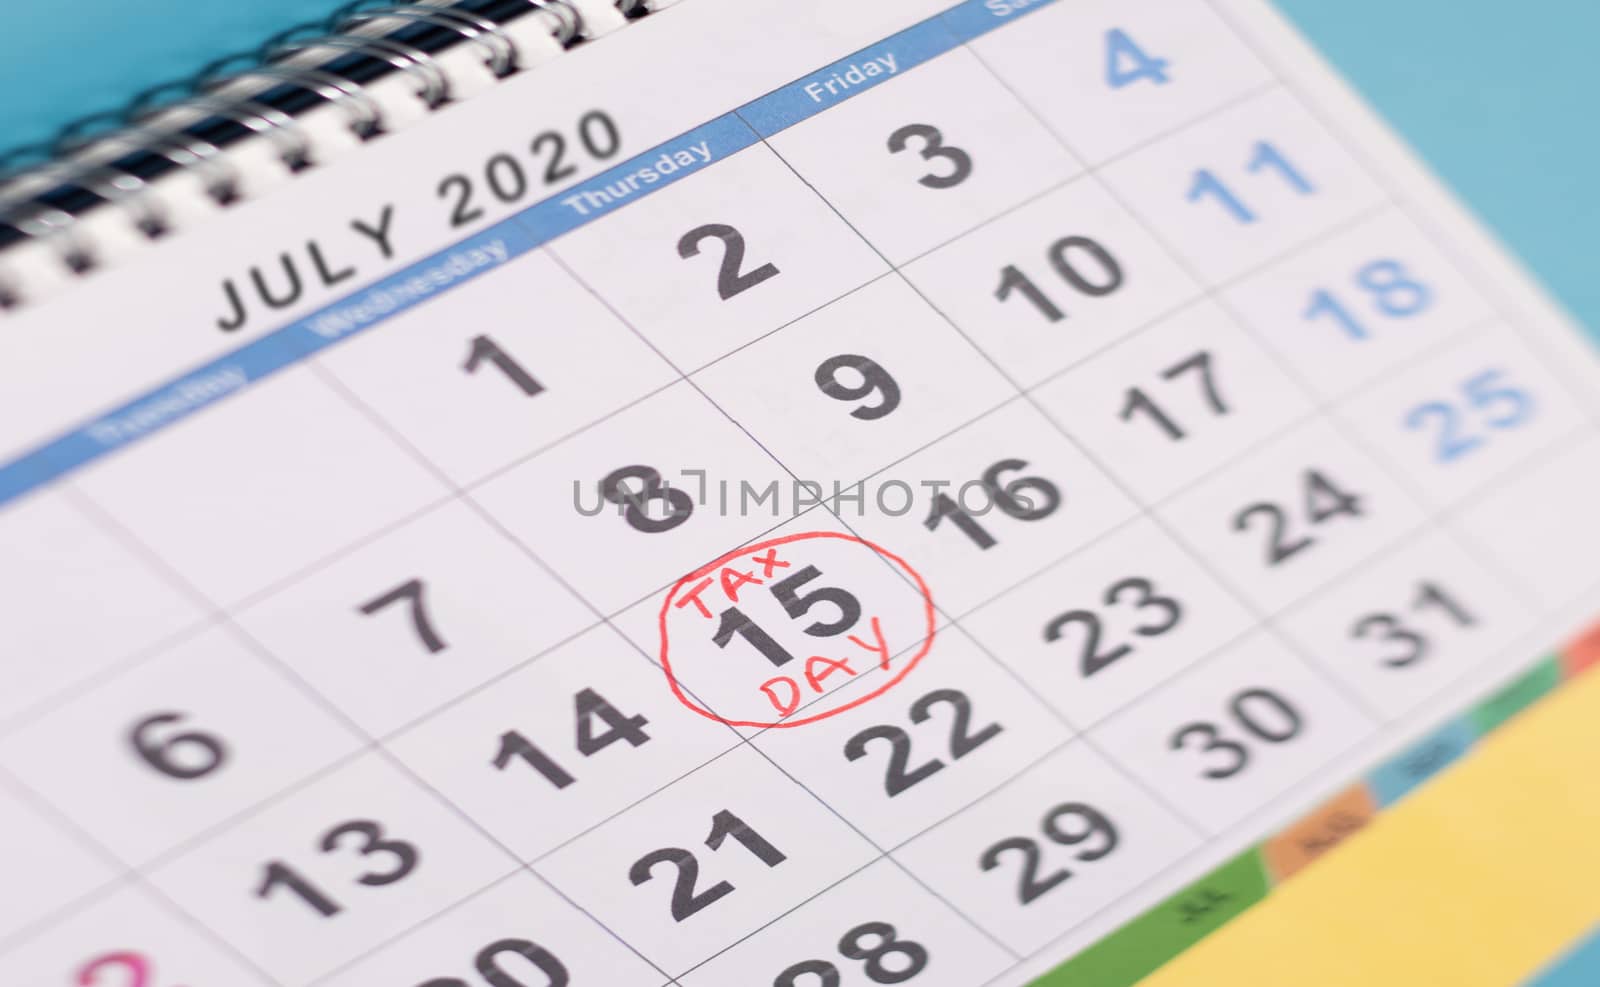 July 15th marked as tax day on calendar as reminder